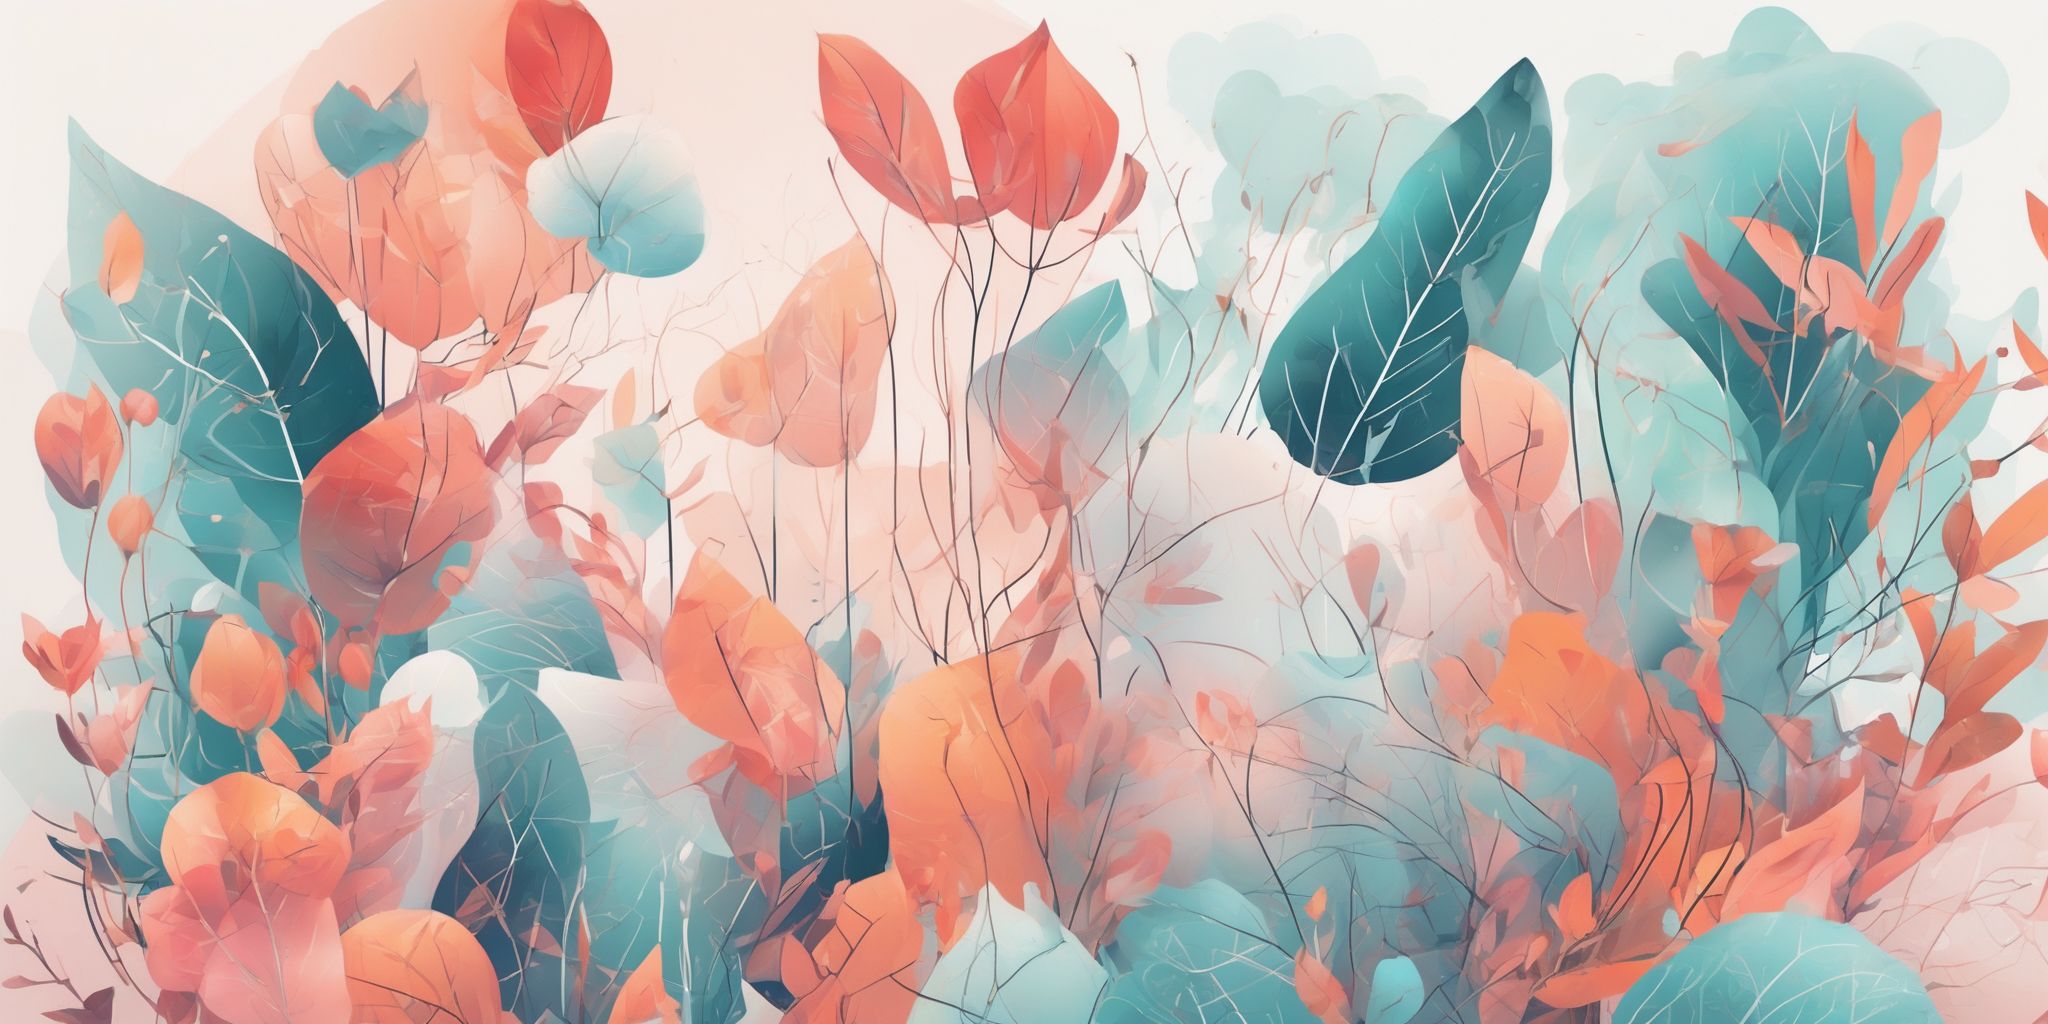 Alternatives in illustration style with gradients and white background